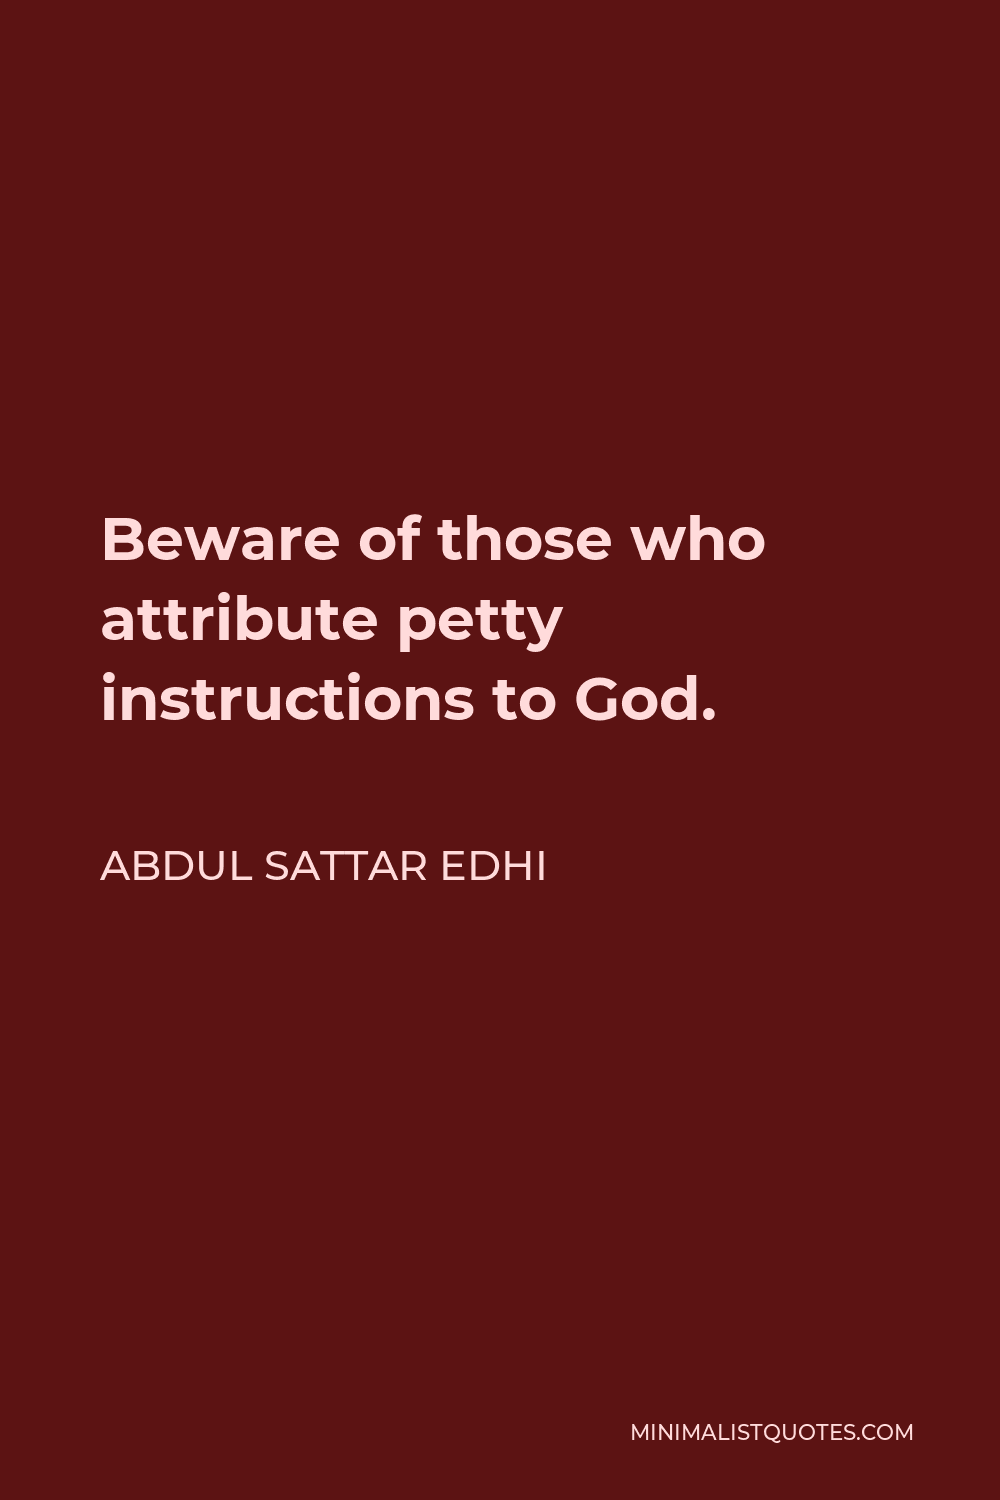 Abdul Sattar Edhi Quote - Beware of those who attribute petty instructions to God.